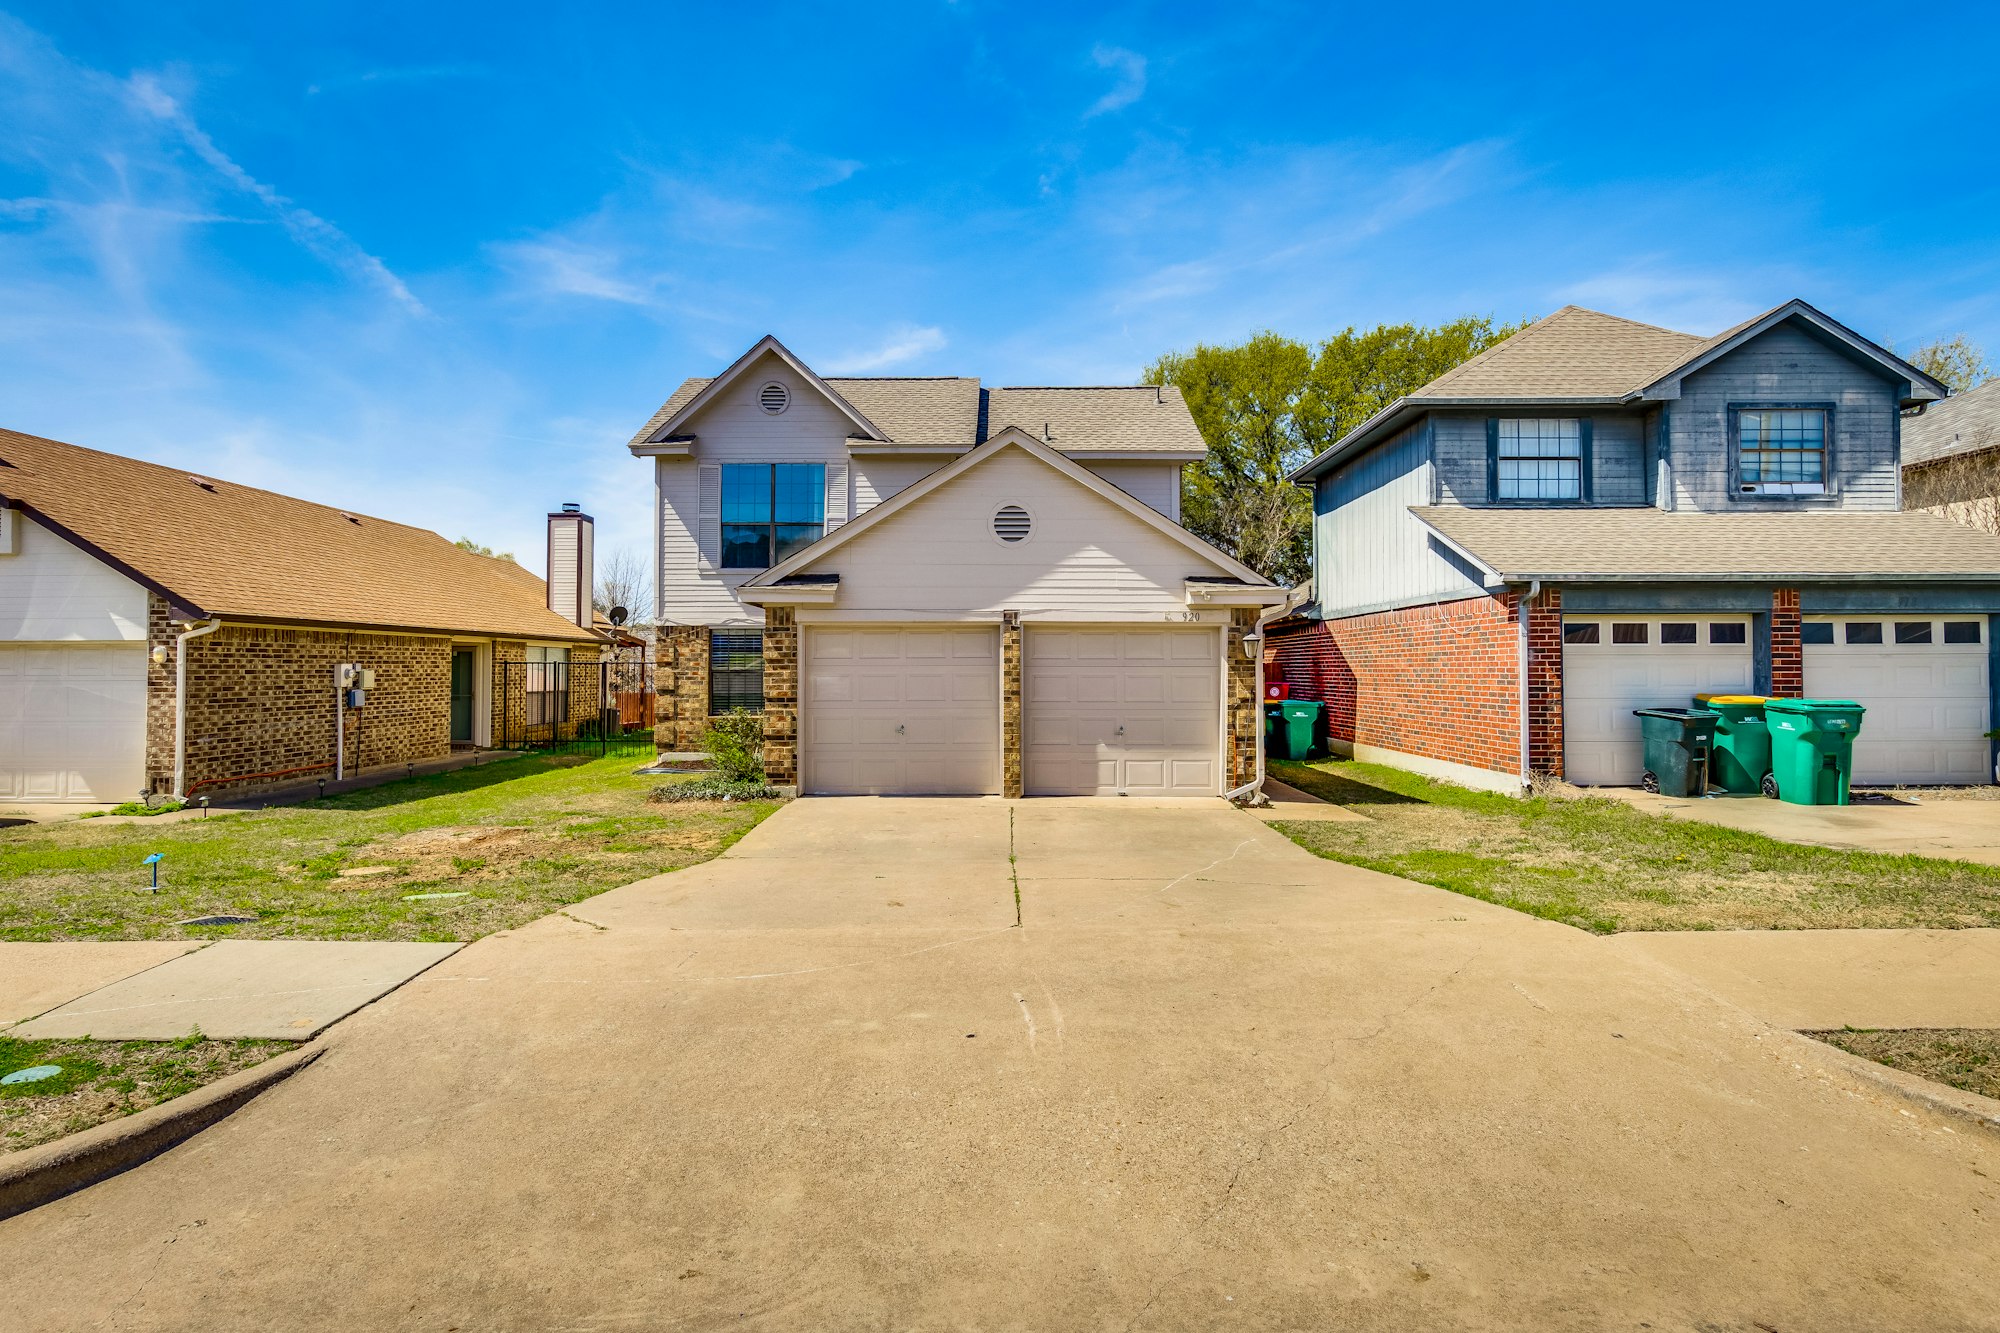 Photo 1 of 24 - 920 S Old Orchard Ln, Lewisville, TX 75067